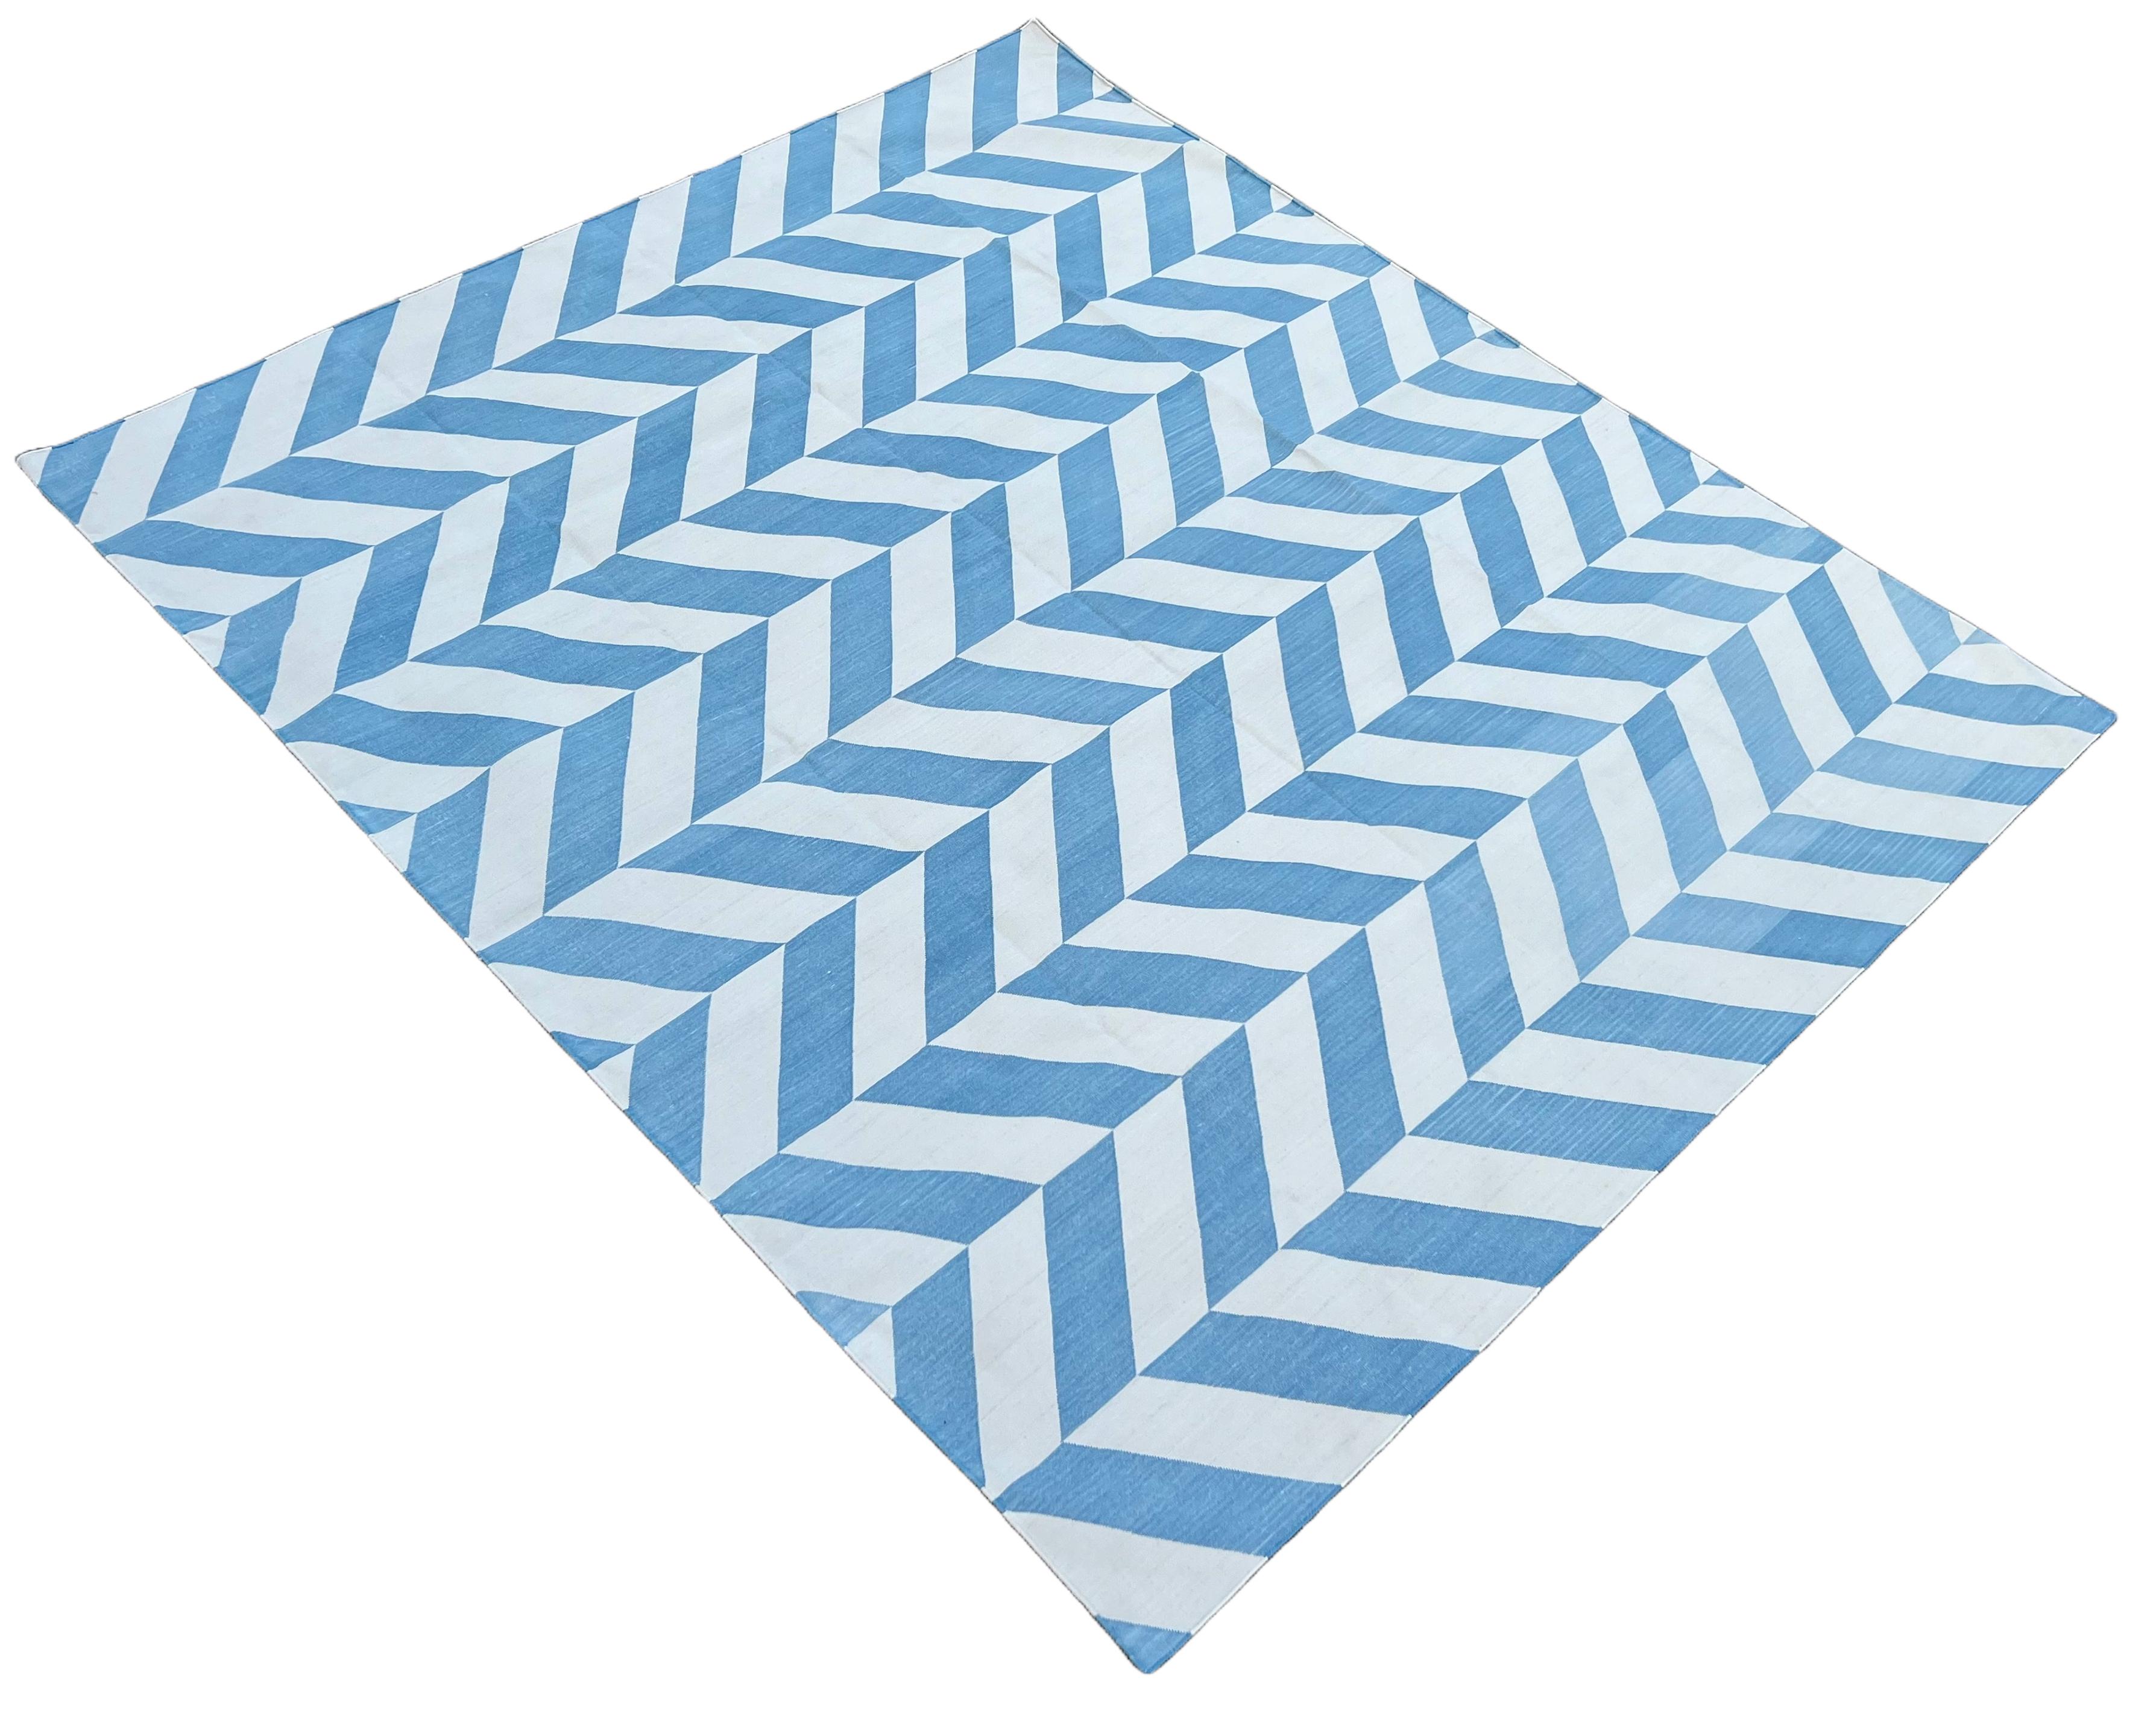 Indian Handmade Cotton Area Flat Weave Rug, Sky Blue And White Zig Zag Striped Dhurrie For Sale